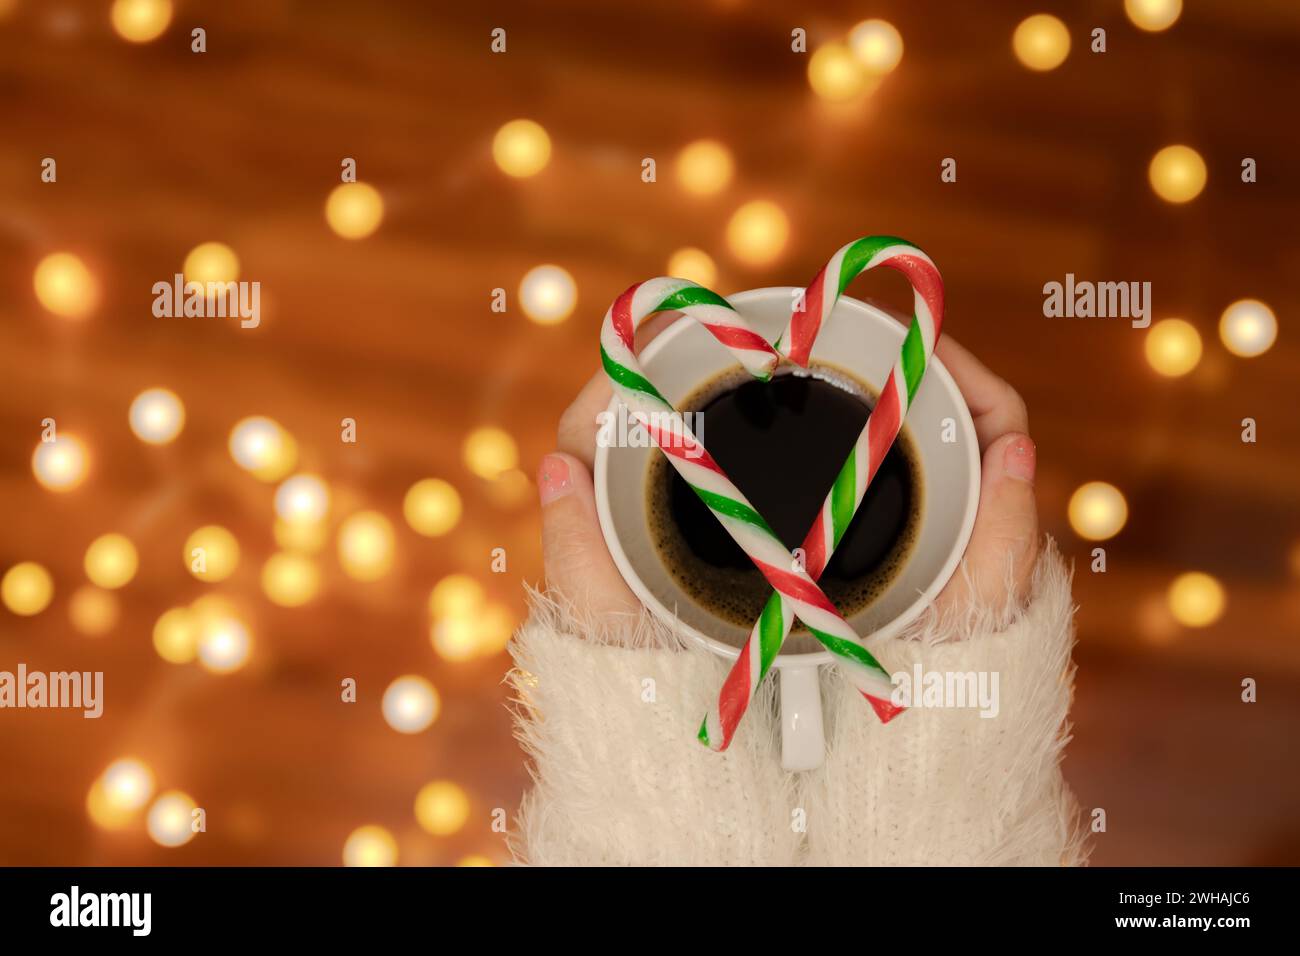 woman hand with sweater holding coffee cup with candy canes in the shape of heart on top, defocus bokeh light decorate for Valentine's Day celebration Stock Photo